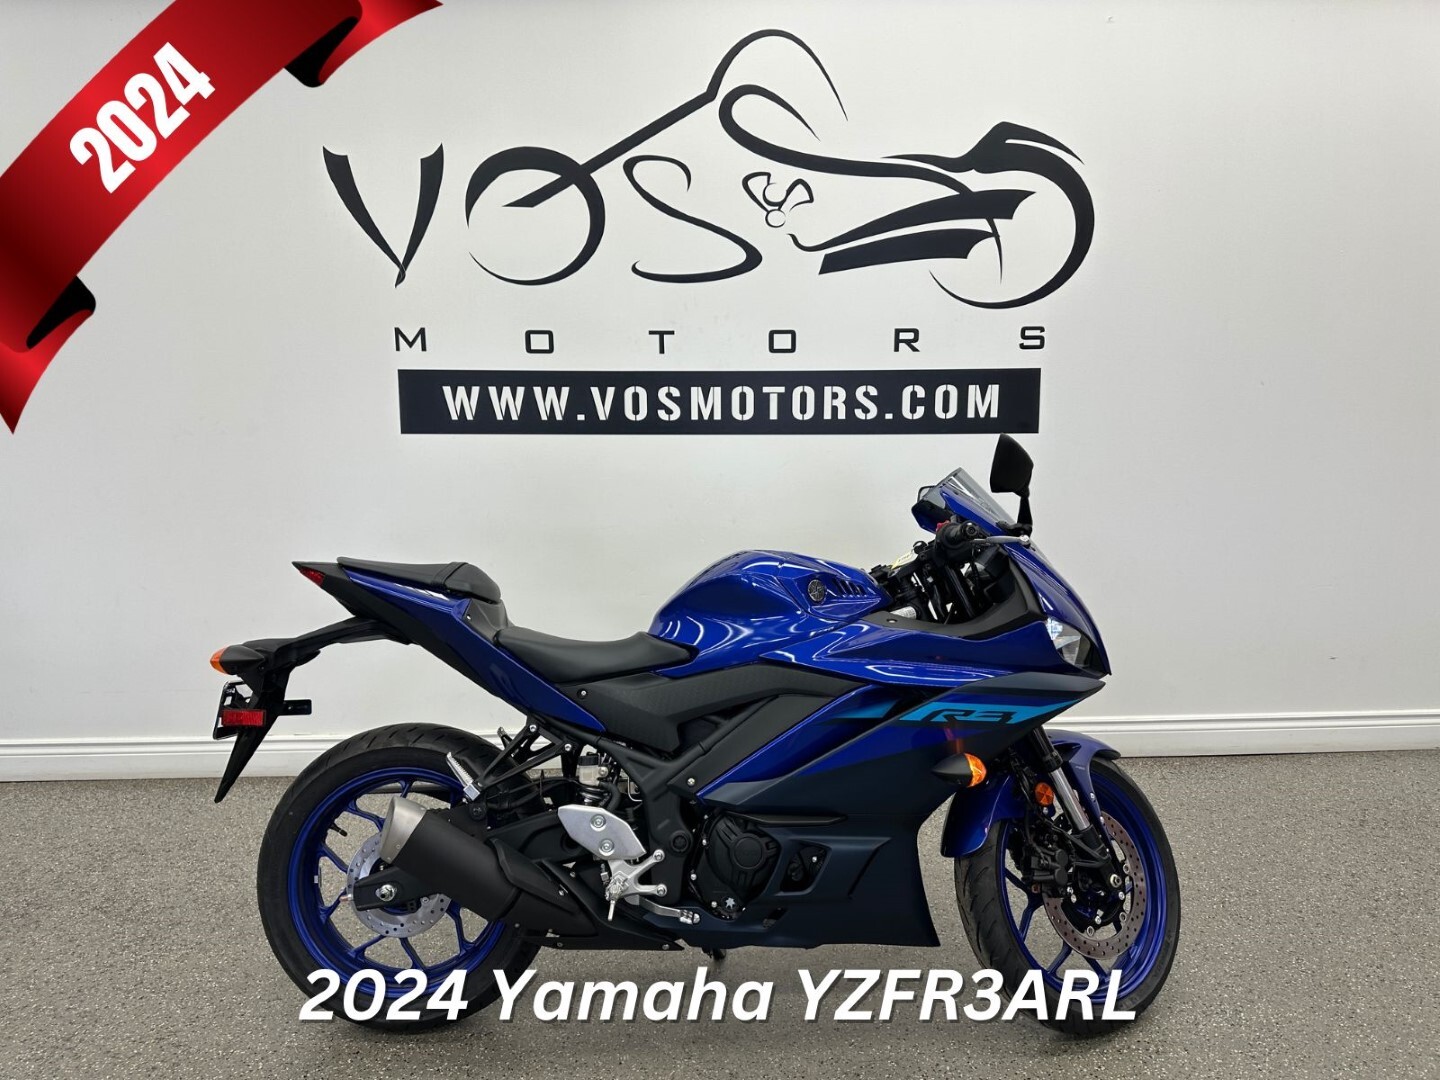 2024 Yamaha YZFR3ARL YZF-R3 - V6054 - -No Payments for 1 Year**